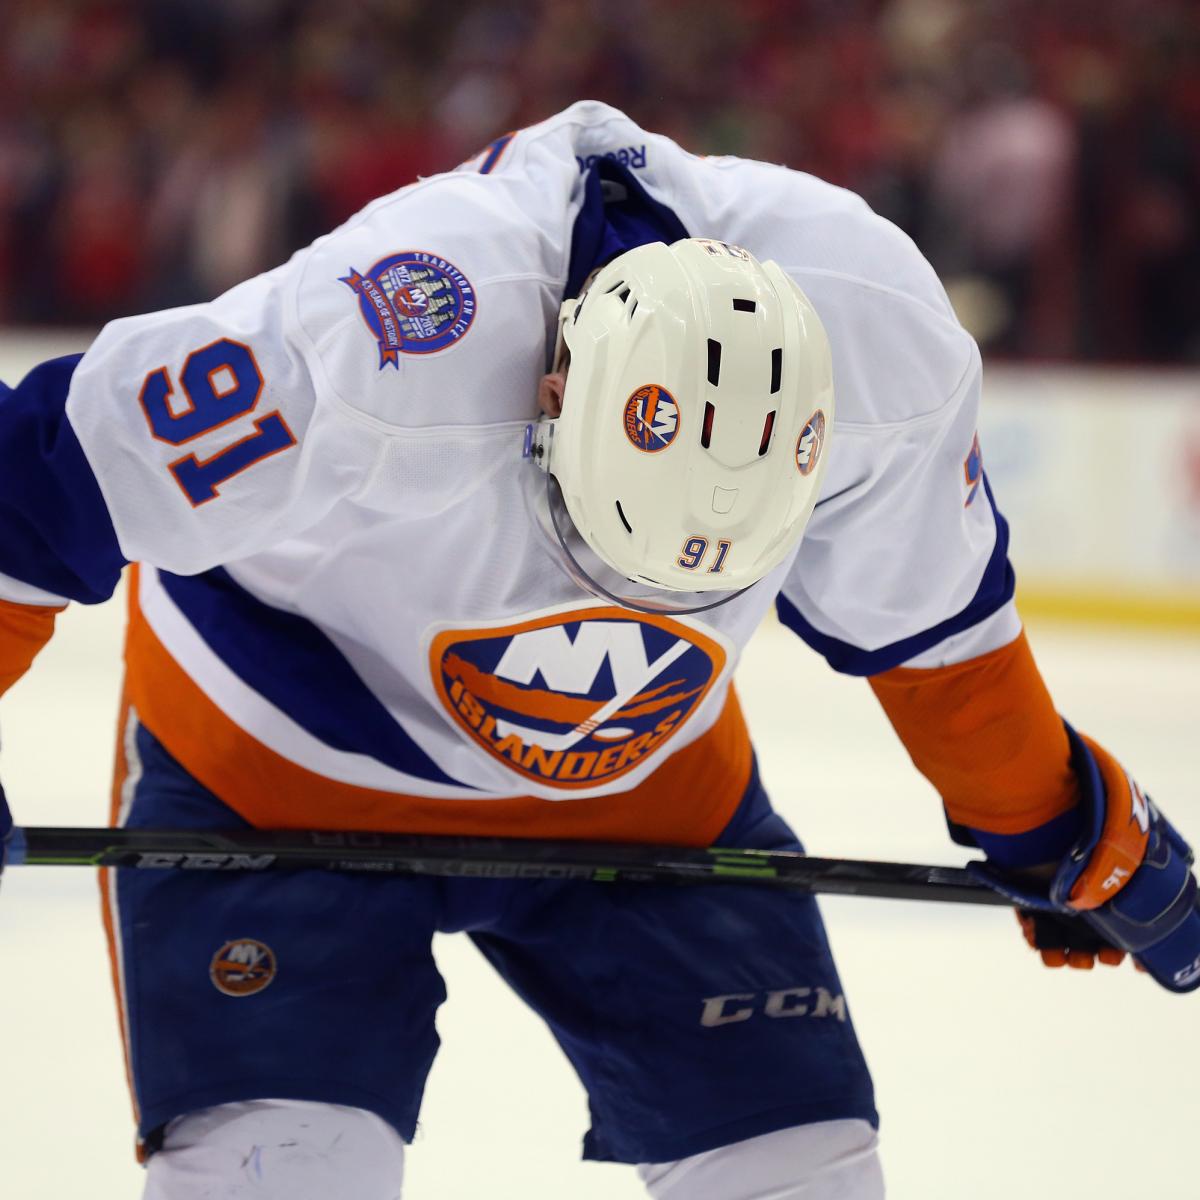 News 12 Westchester - ISLES WIN: The New York Islanders have